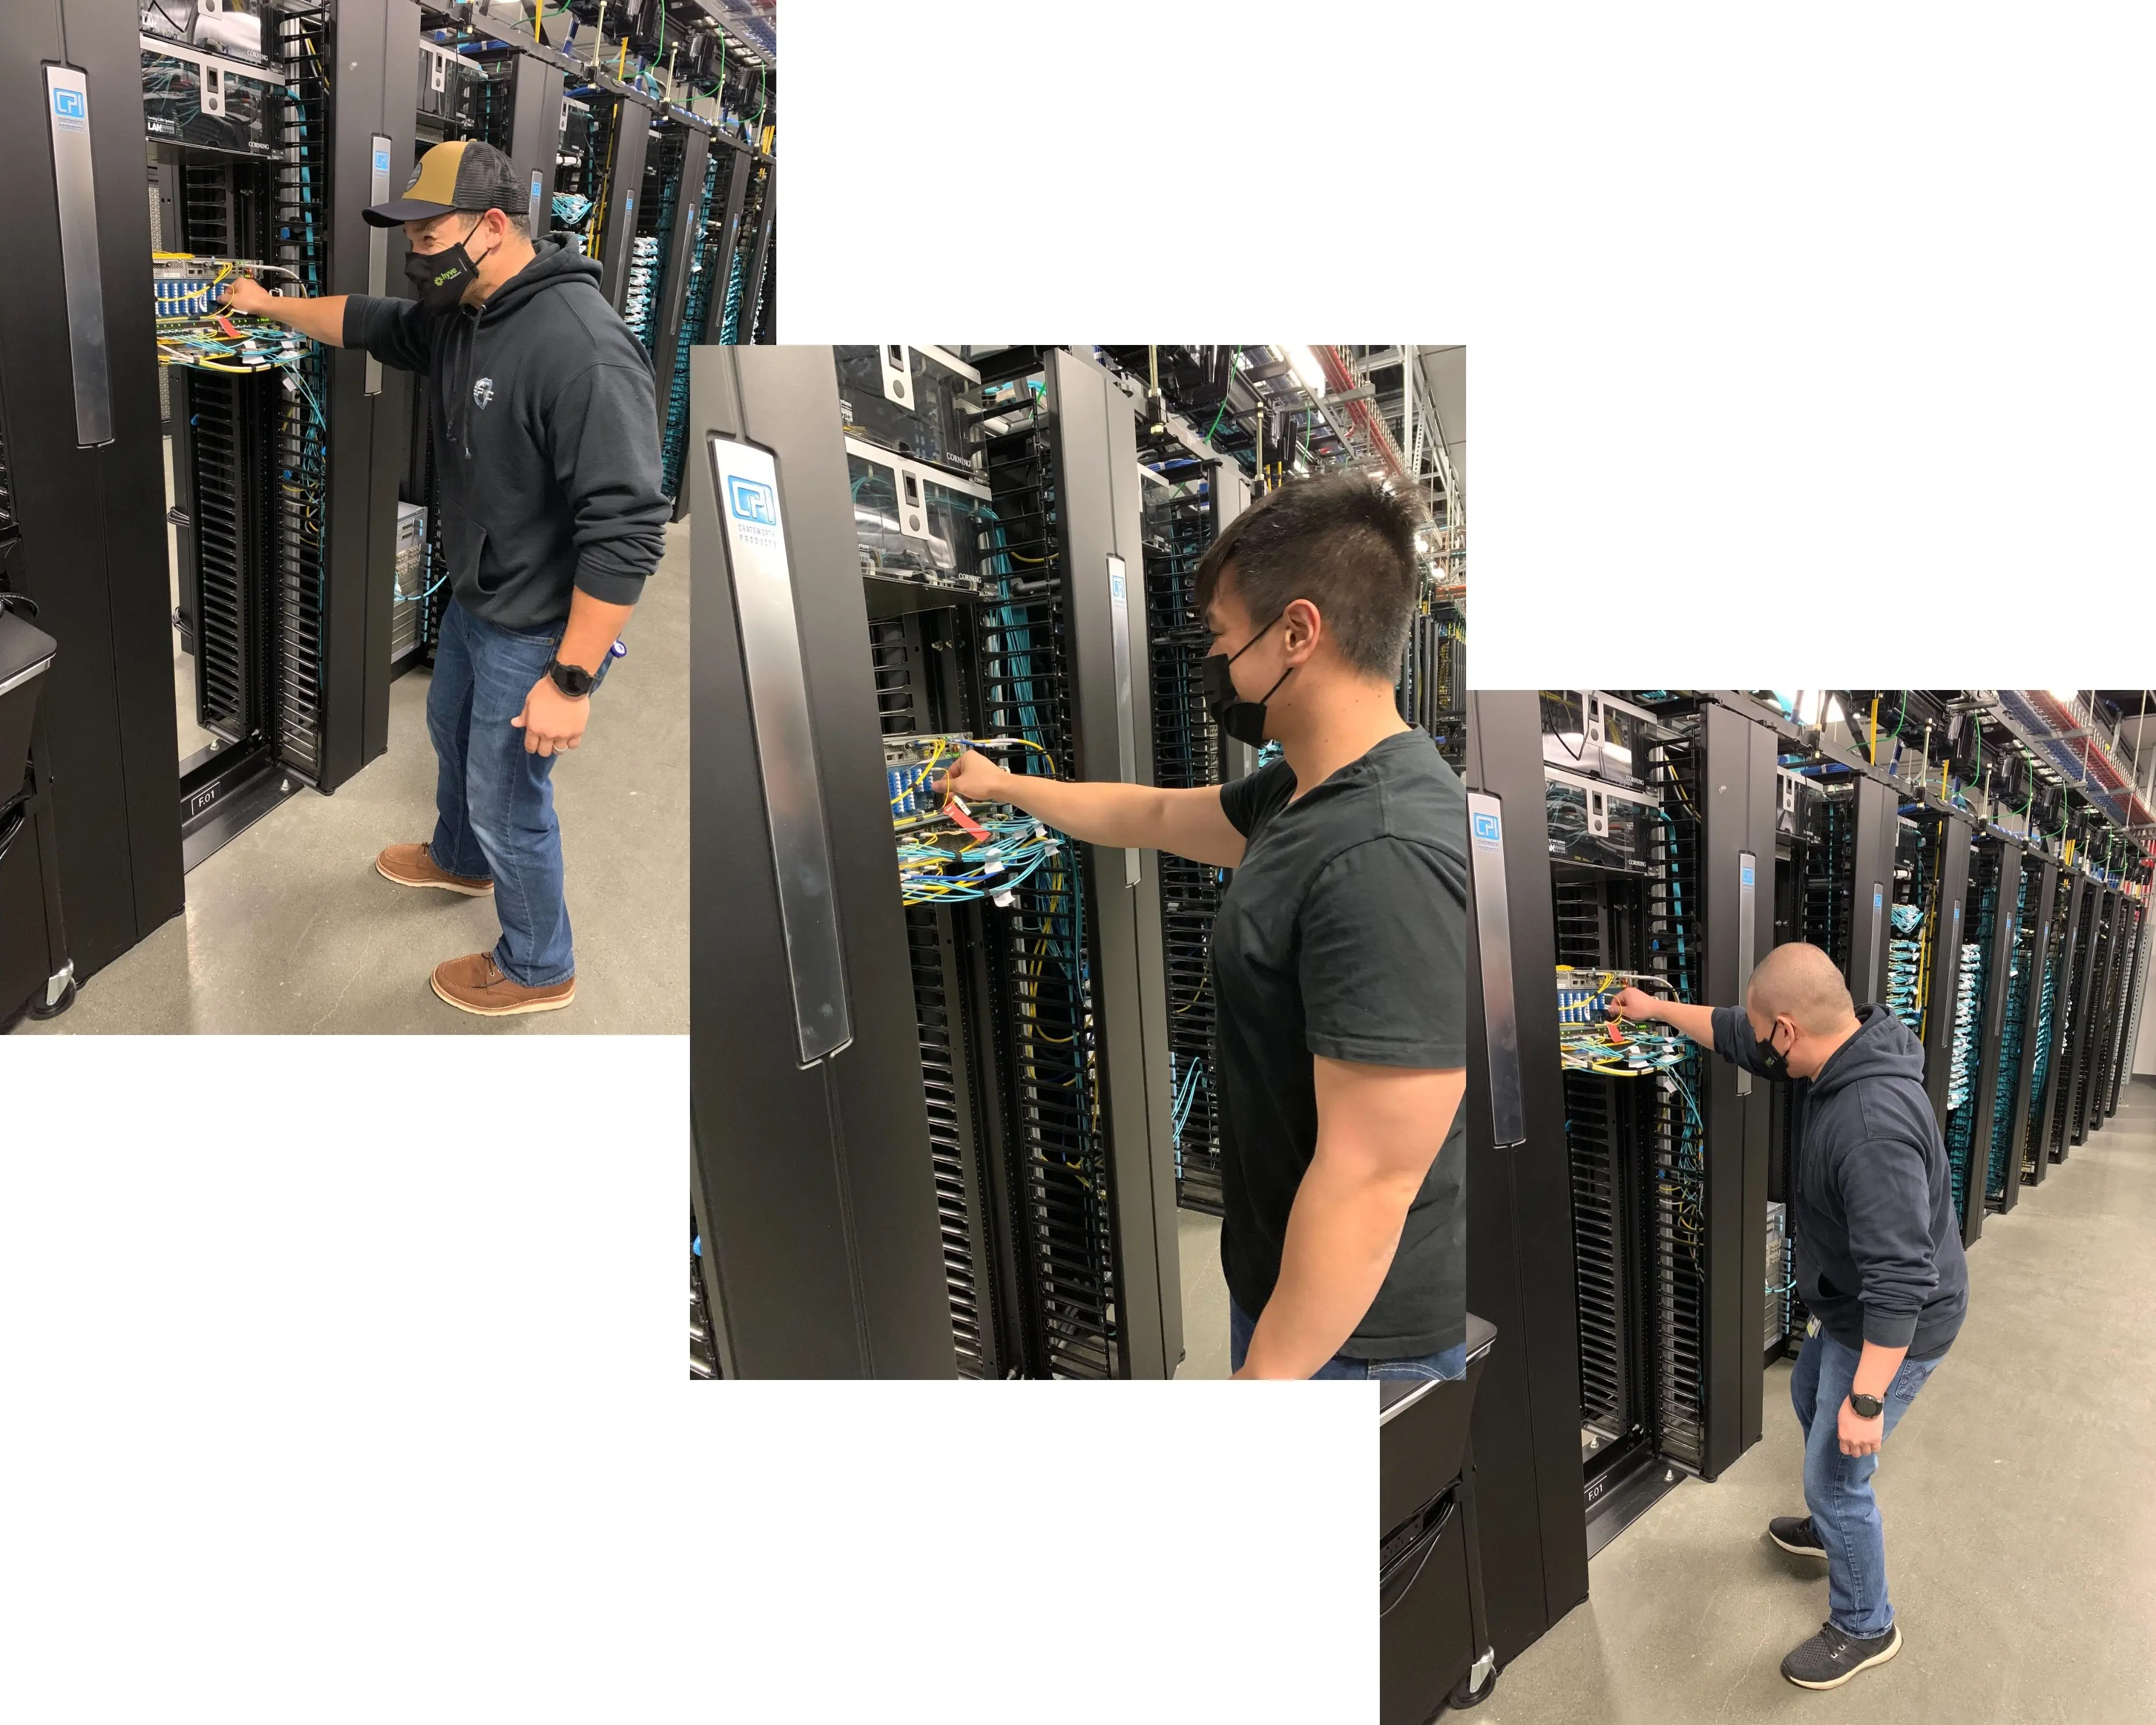 From left to right, Eddie, Victor, and Jimmy prepare to physically unplug the network fiber at each of SJC’s three data center facilities. 